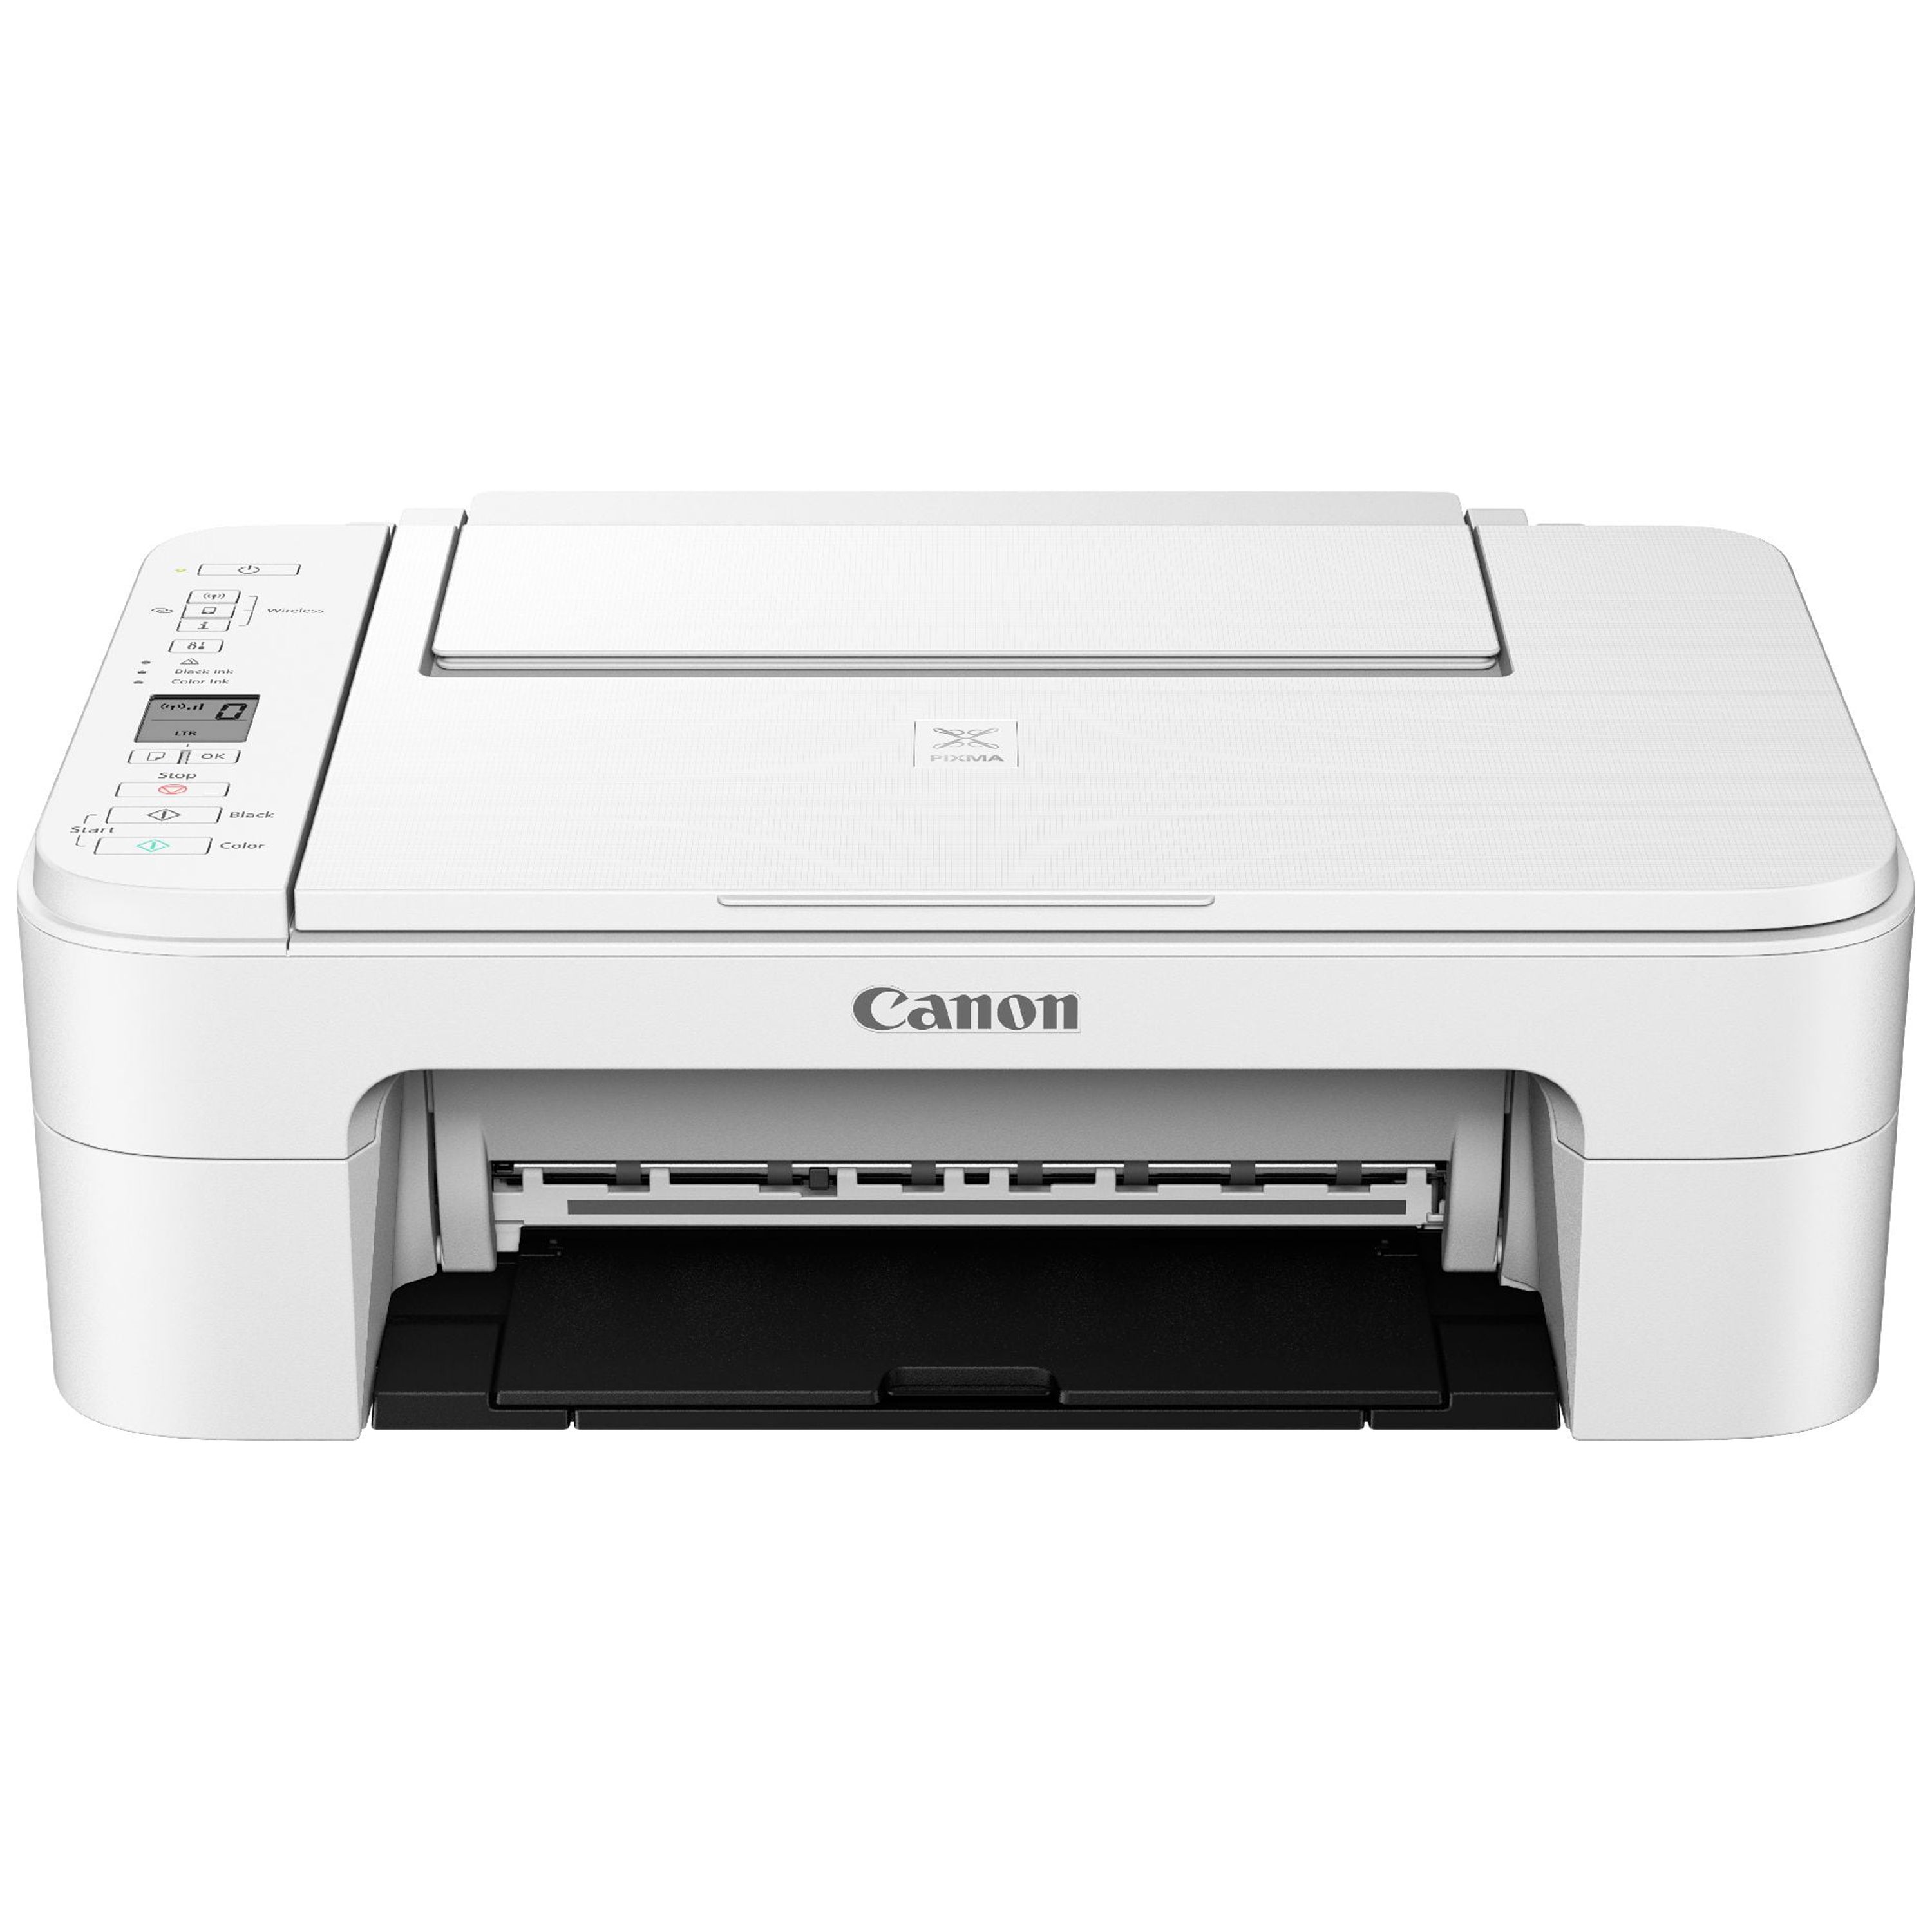 Canon TS3322 Wireless All In One Printer - image 1 of 4